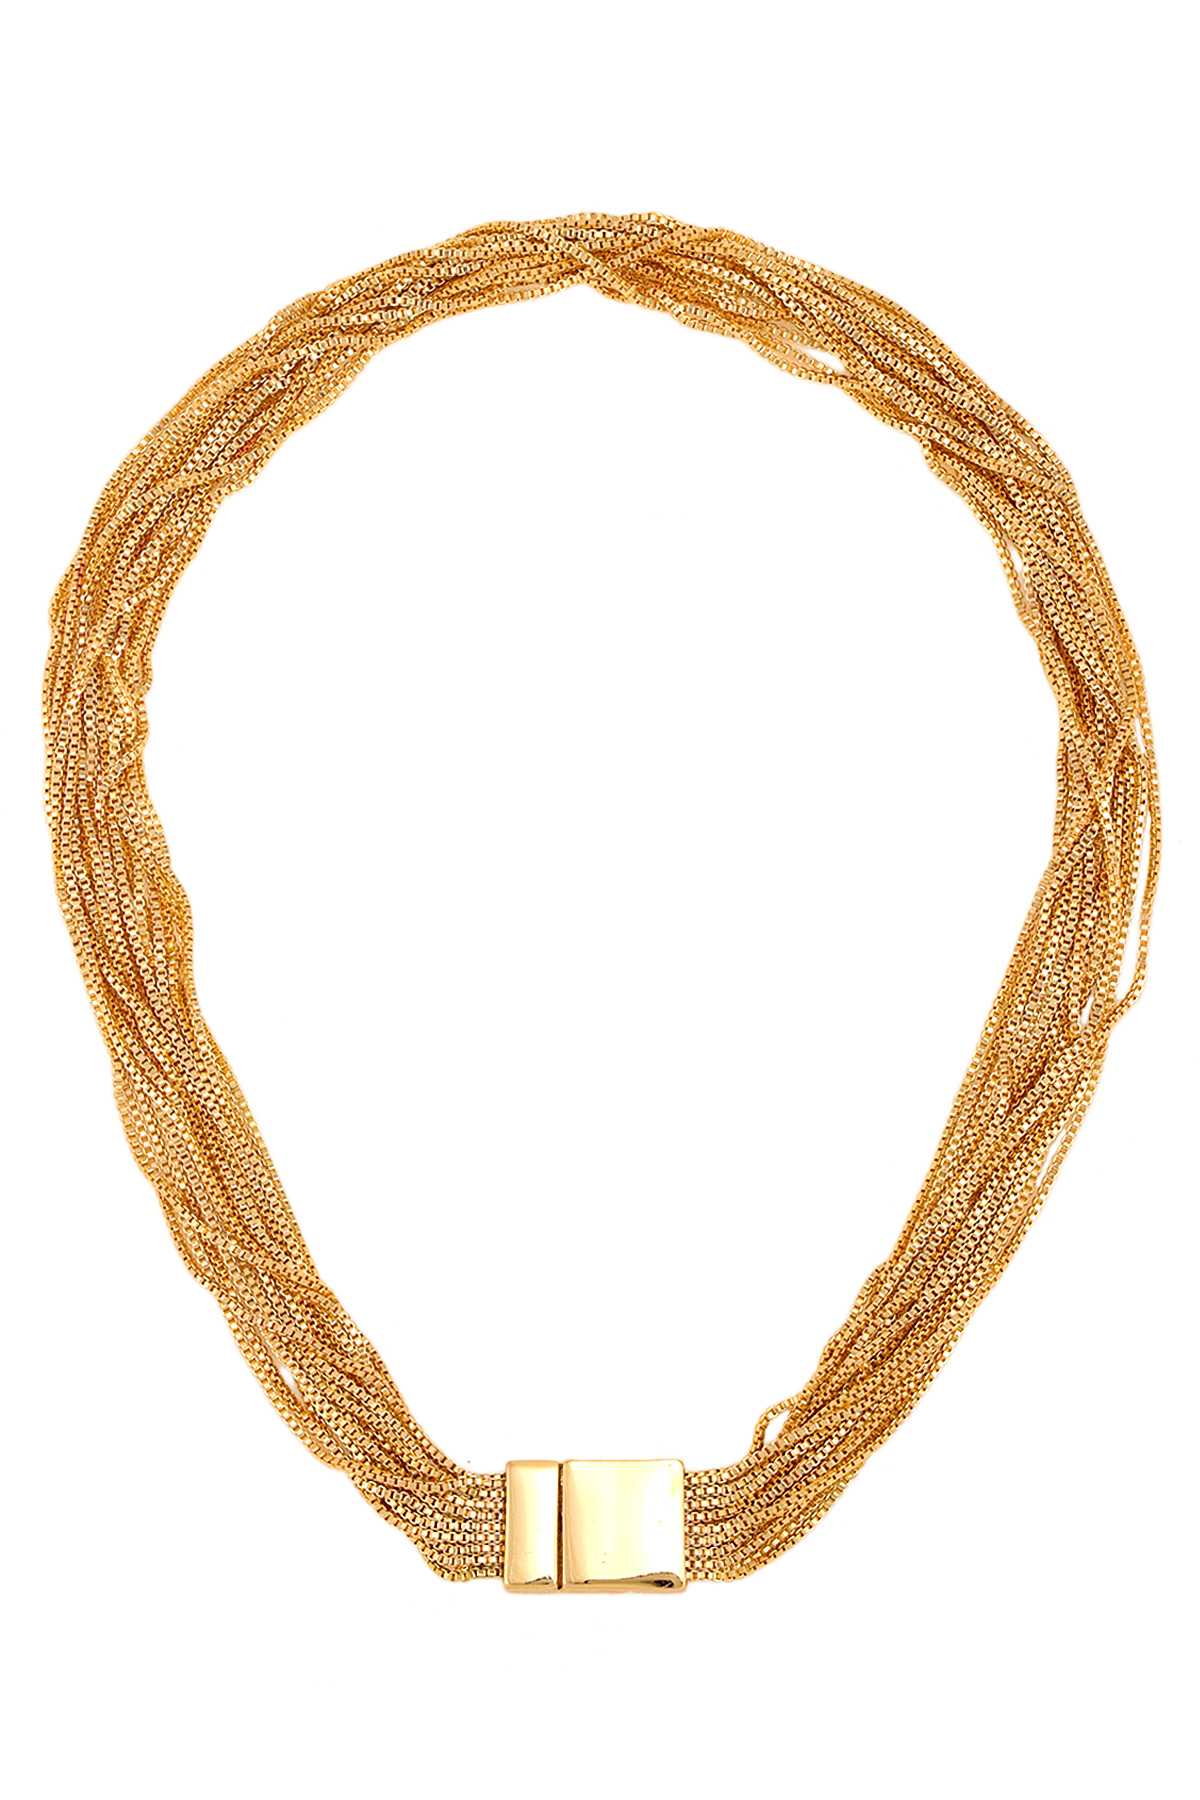 GOLD DIPPED Metal Linked Charm Layered Necklace